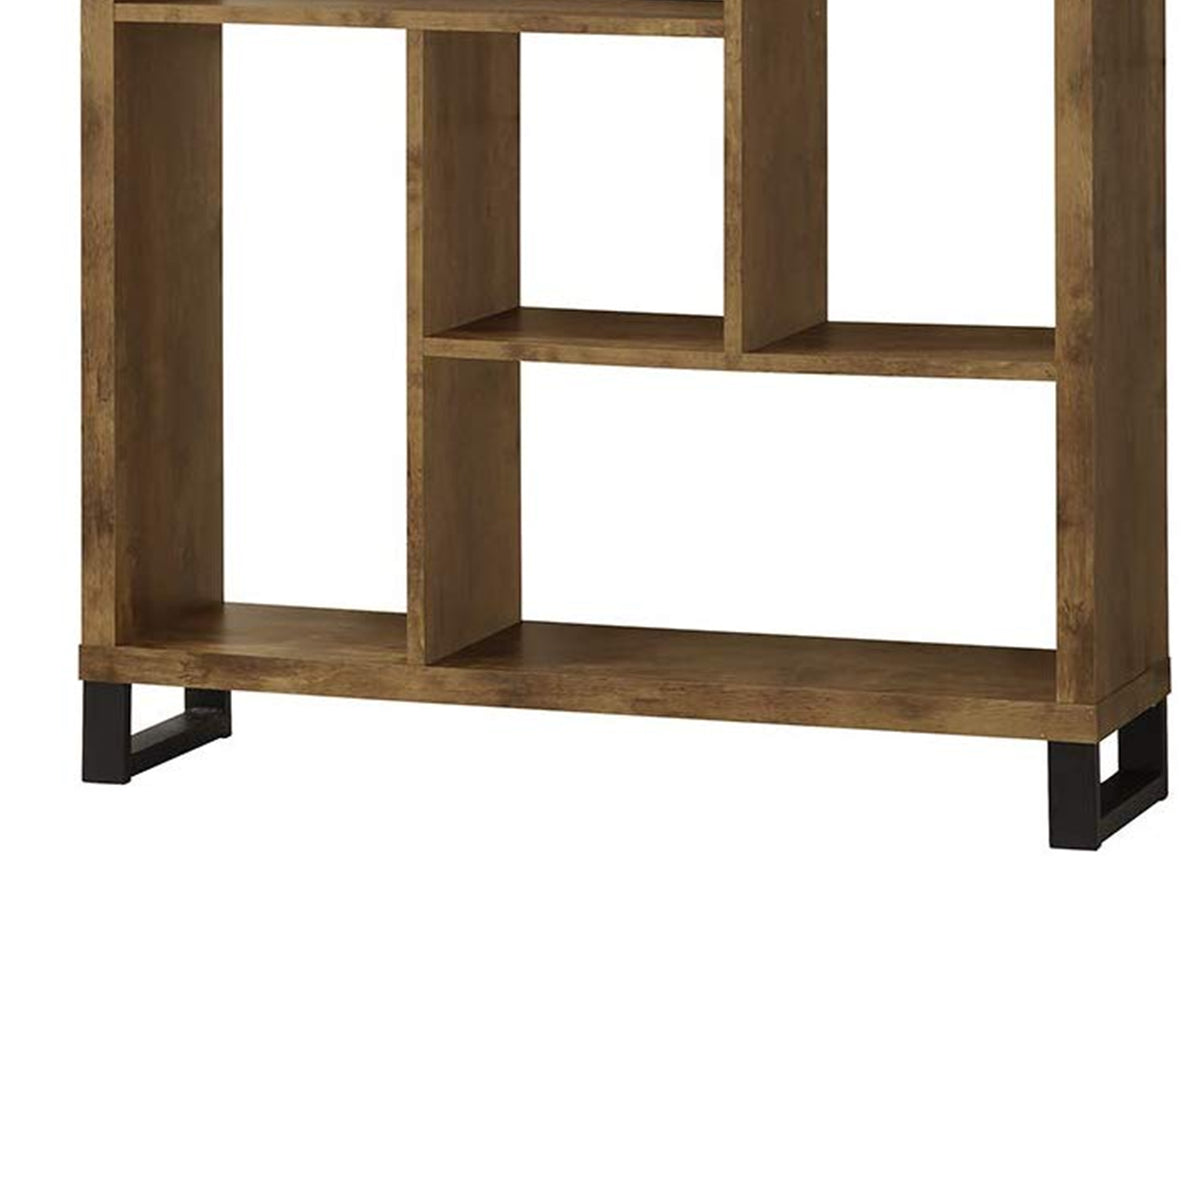 Metal and Wood Modern Style Bookcase with Multiple Shelves, Brown - BM159134